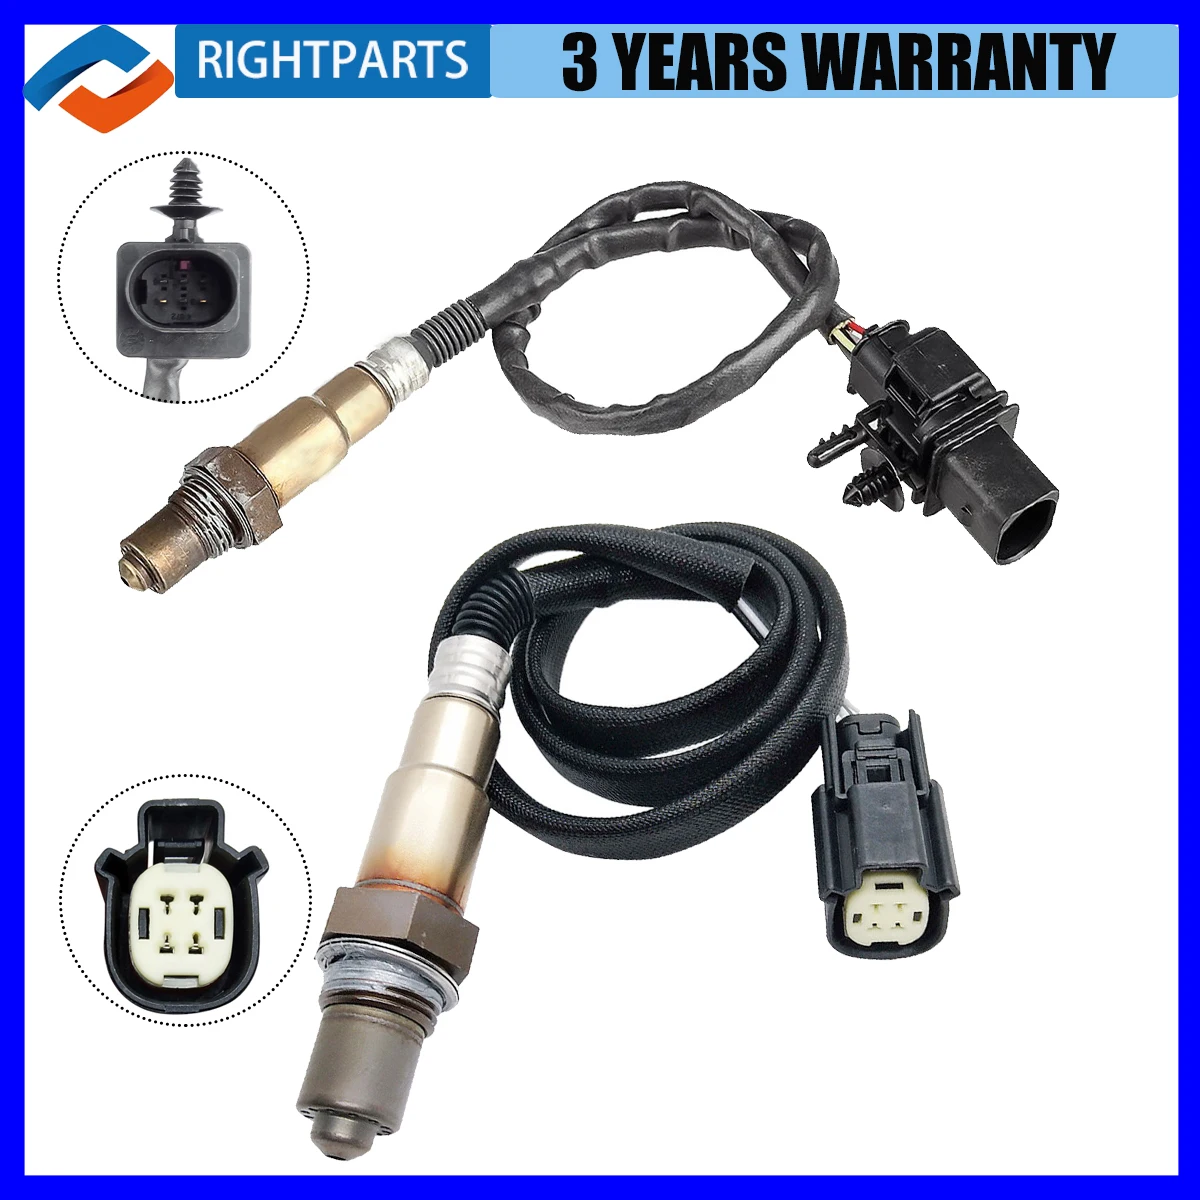 

New Up+Downstream Oxygen O2 Sensor For Ford Focus 2.0L 2012 2013 2014 Fusion 1.6L 2013 2014 Lincoln MKC 2.3L 2015 BV6A-9Y460-AA